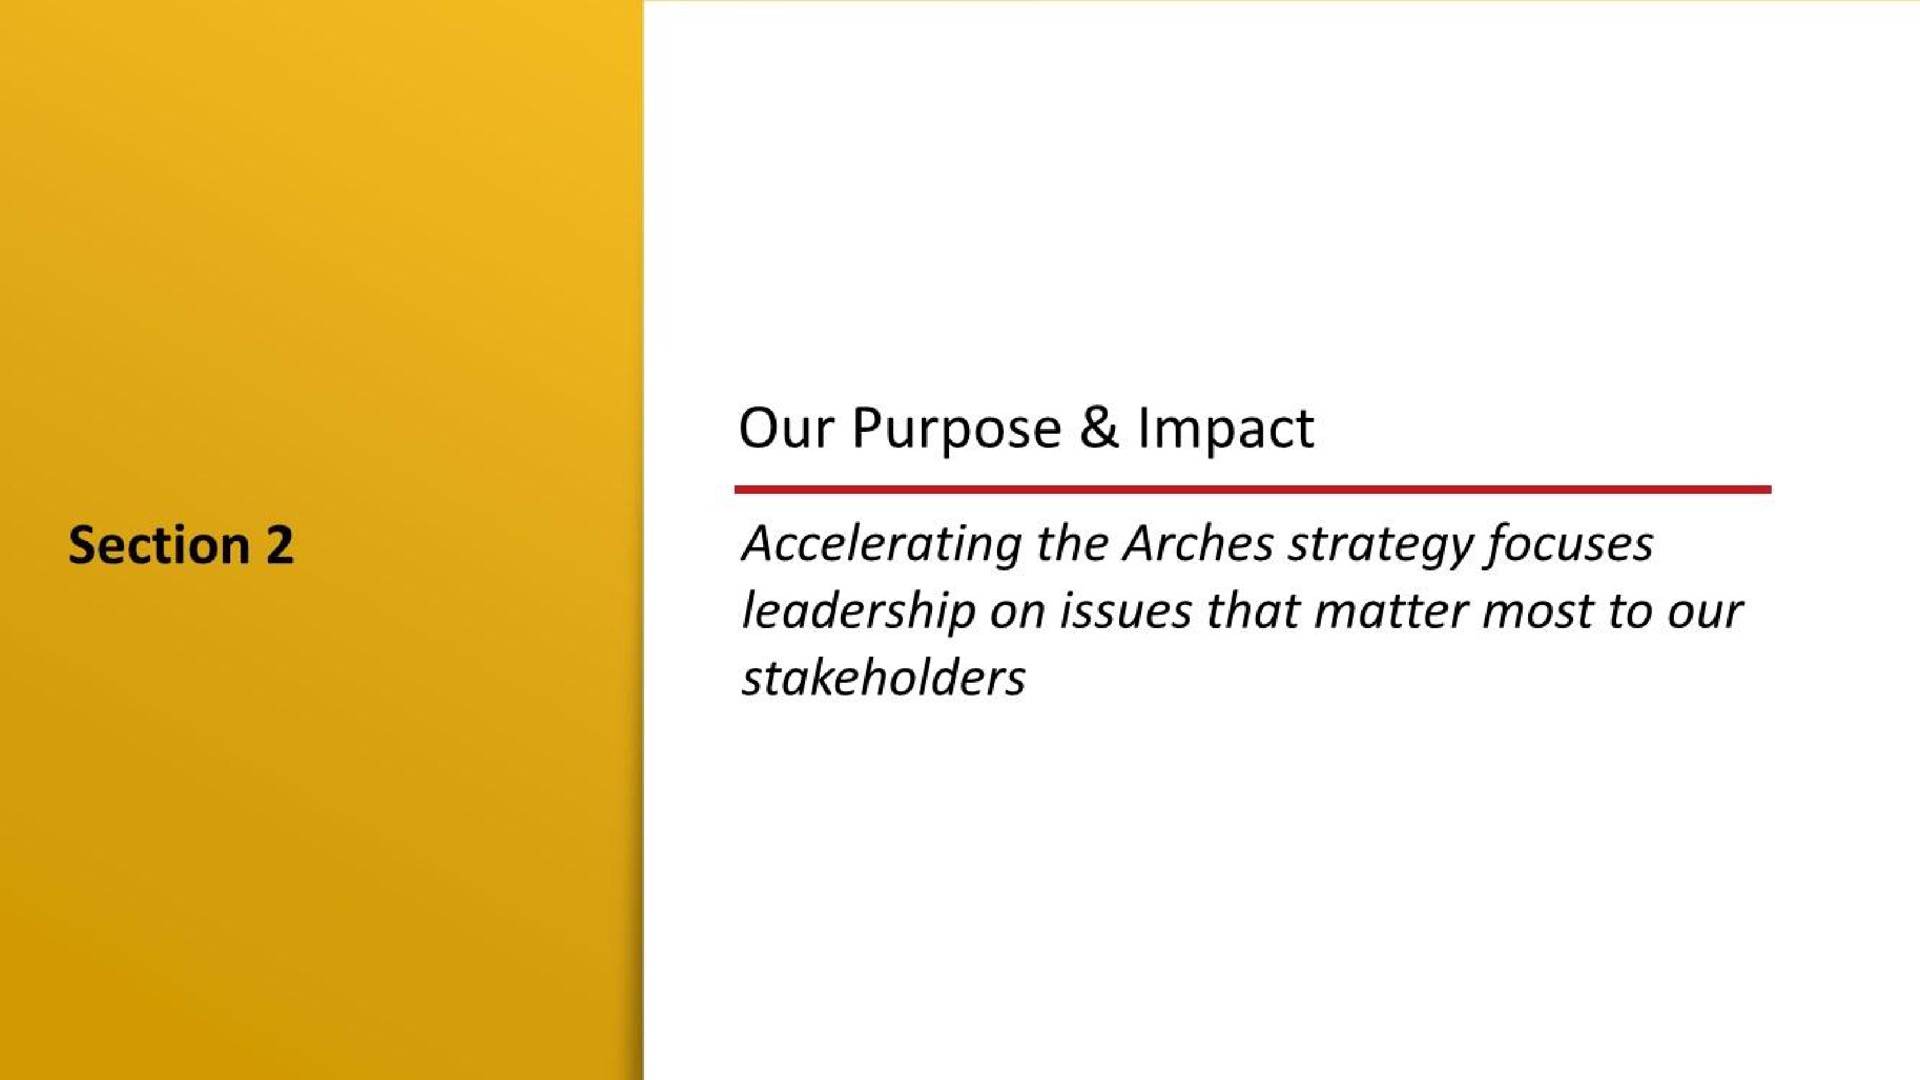 our purpose impact accelerating the arches strategy focuses leadership on issues that matter most to our stakeholders | McDonald's